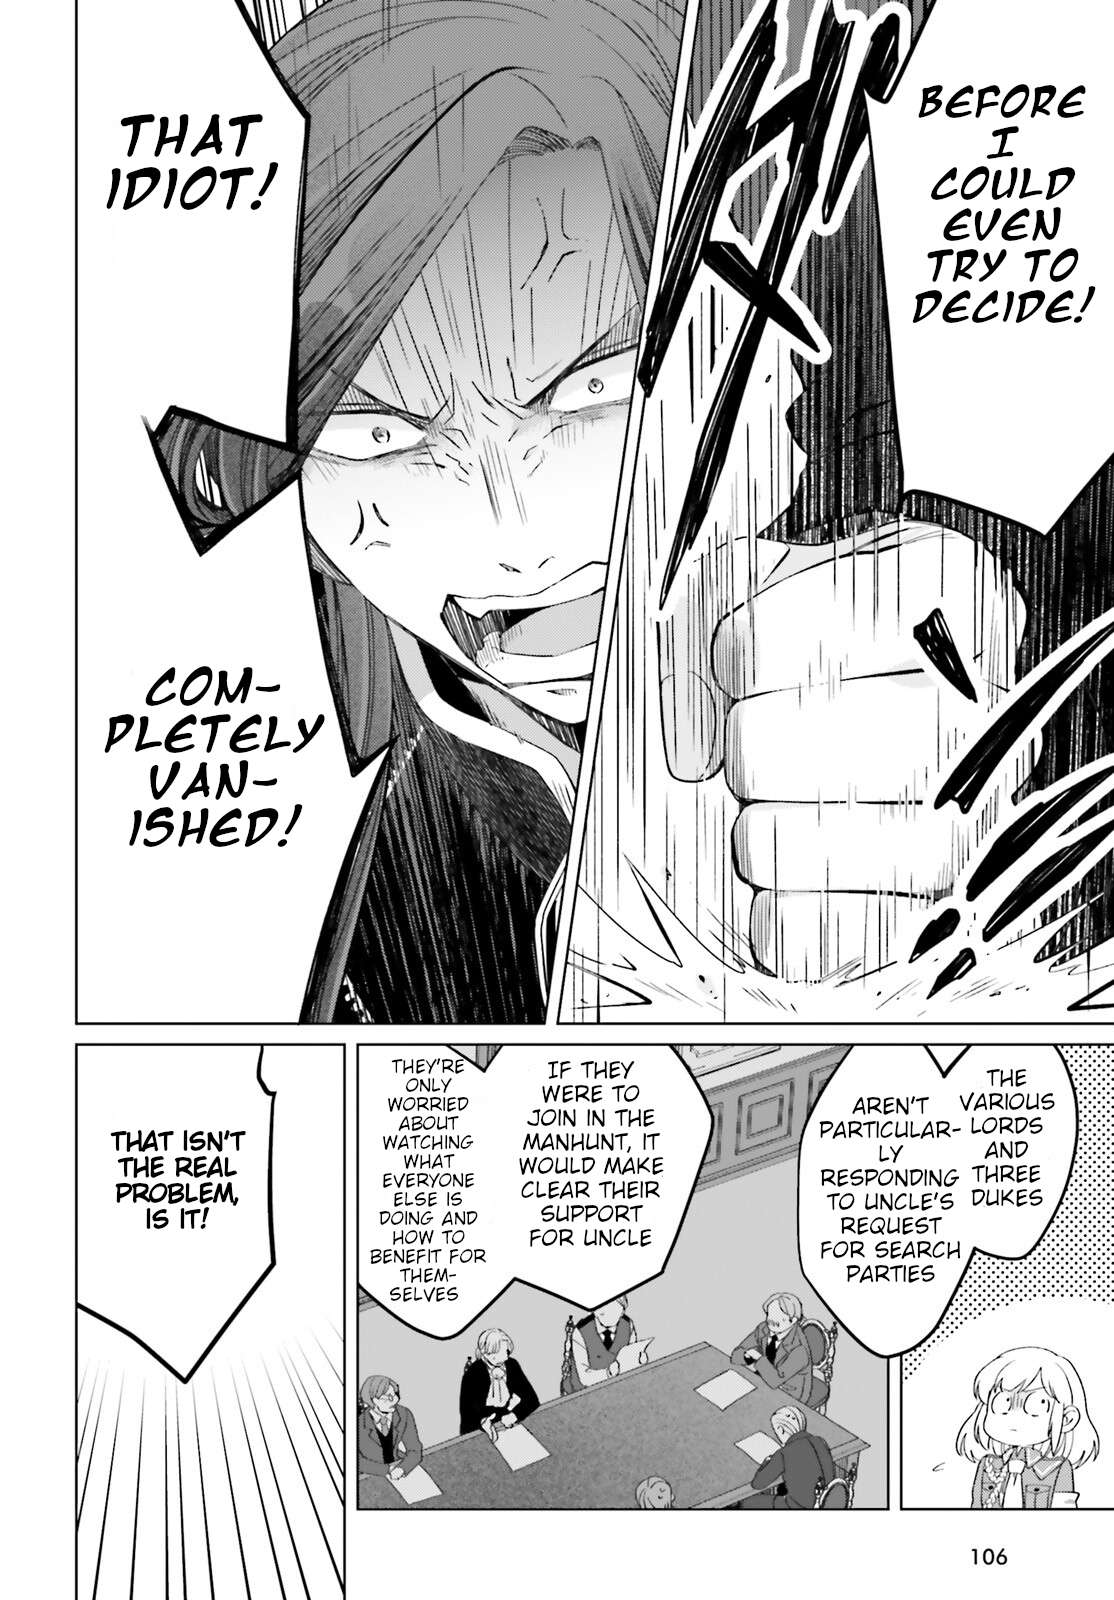 Win Over The Dragon Emperor This Time Around, Noble Girl! - chapter 21 - #4